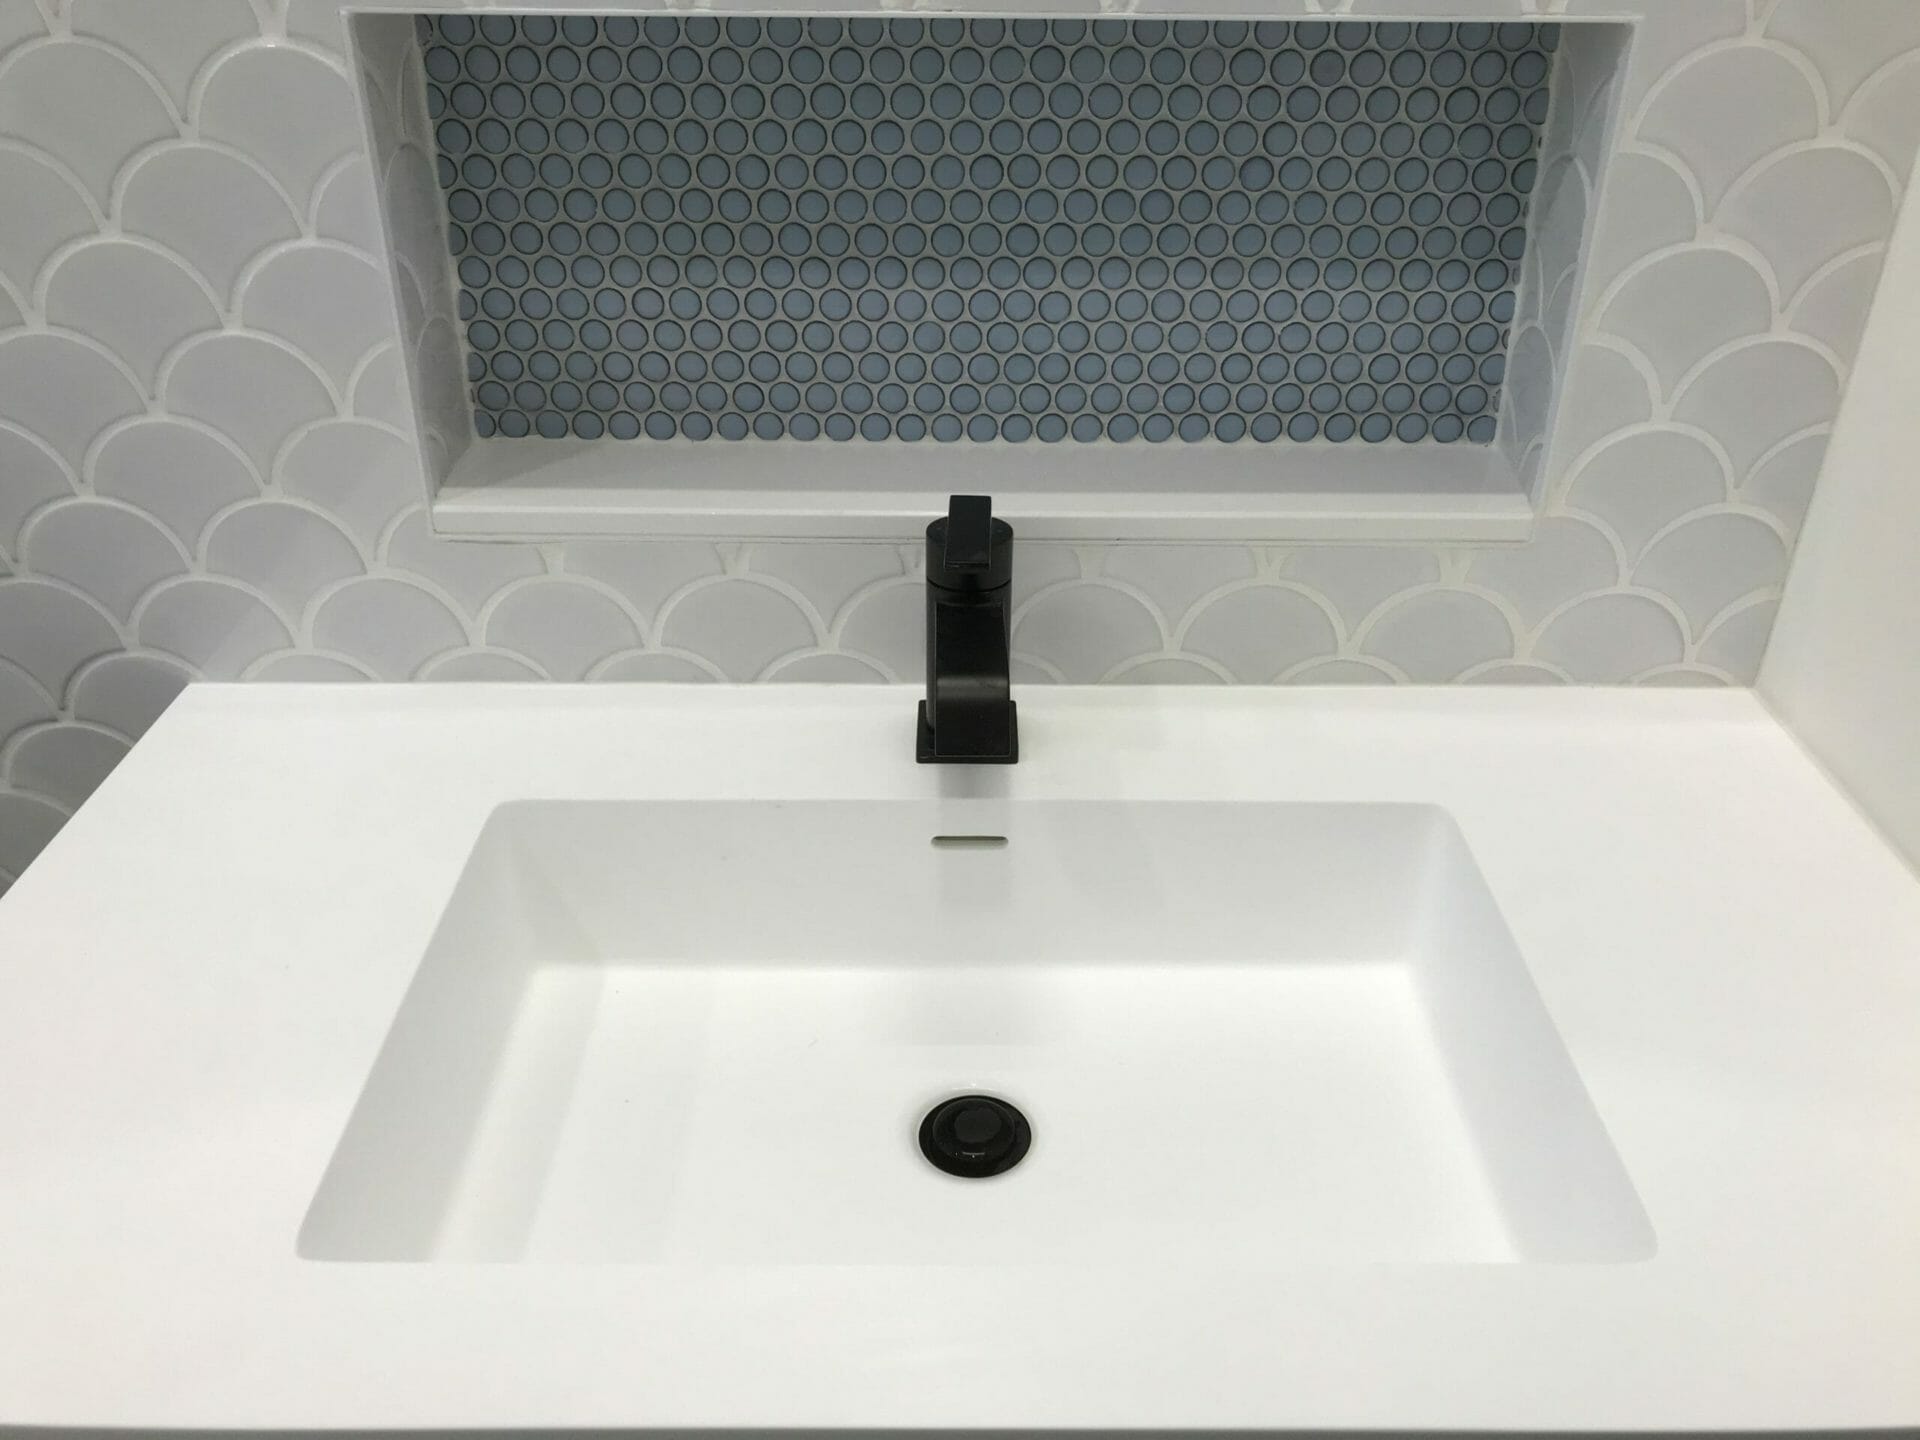 Sink example for sink install service.